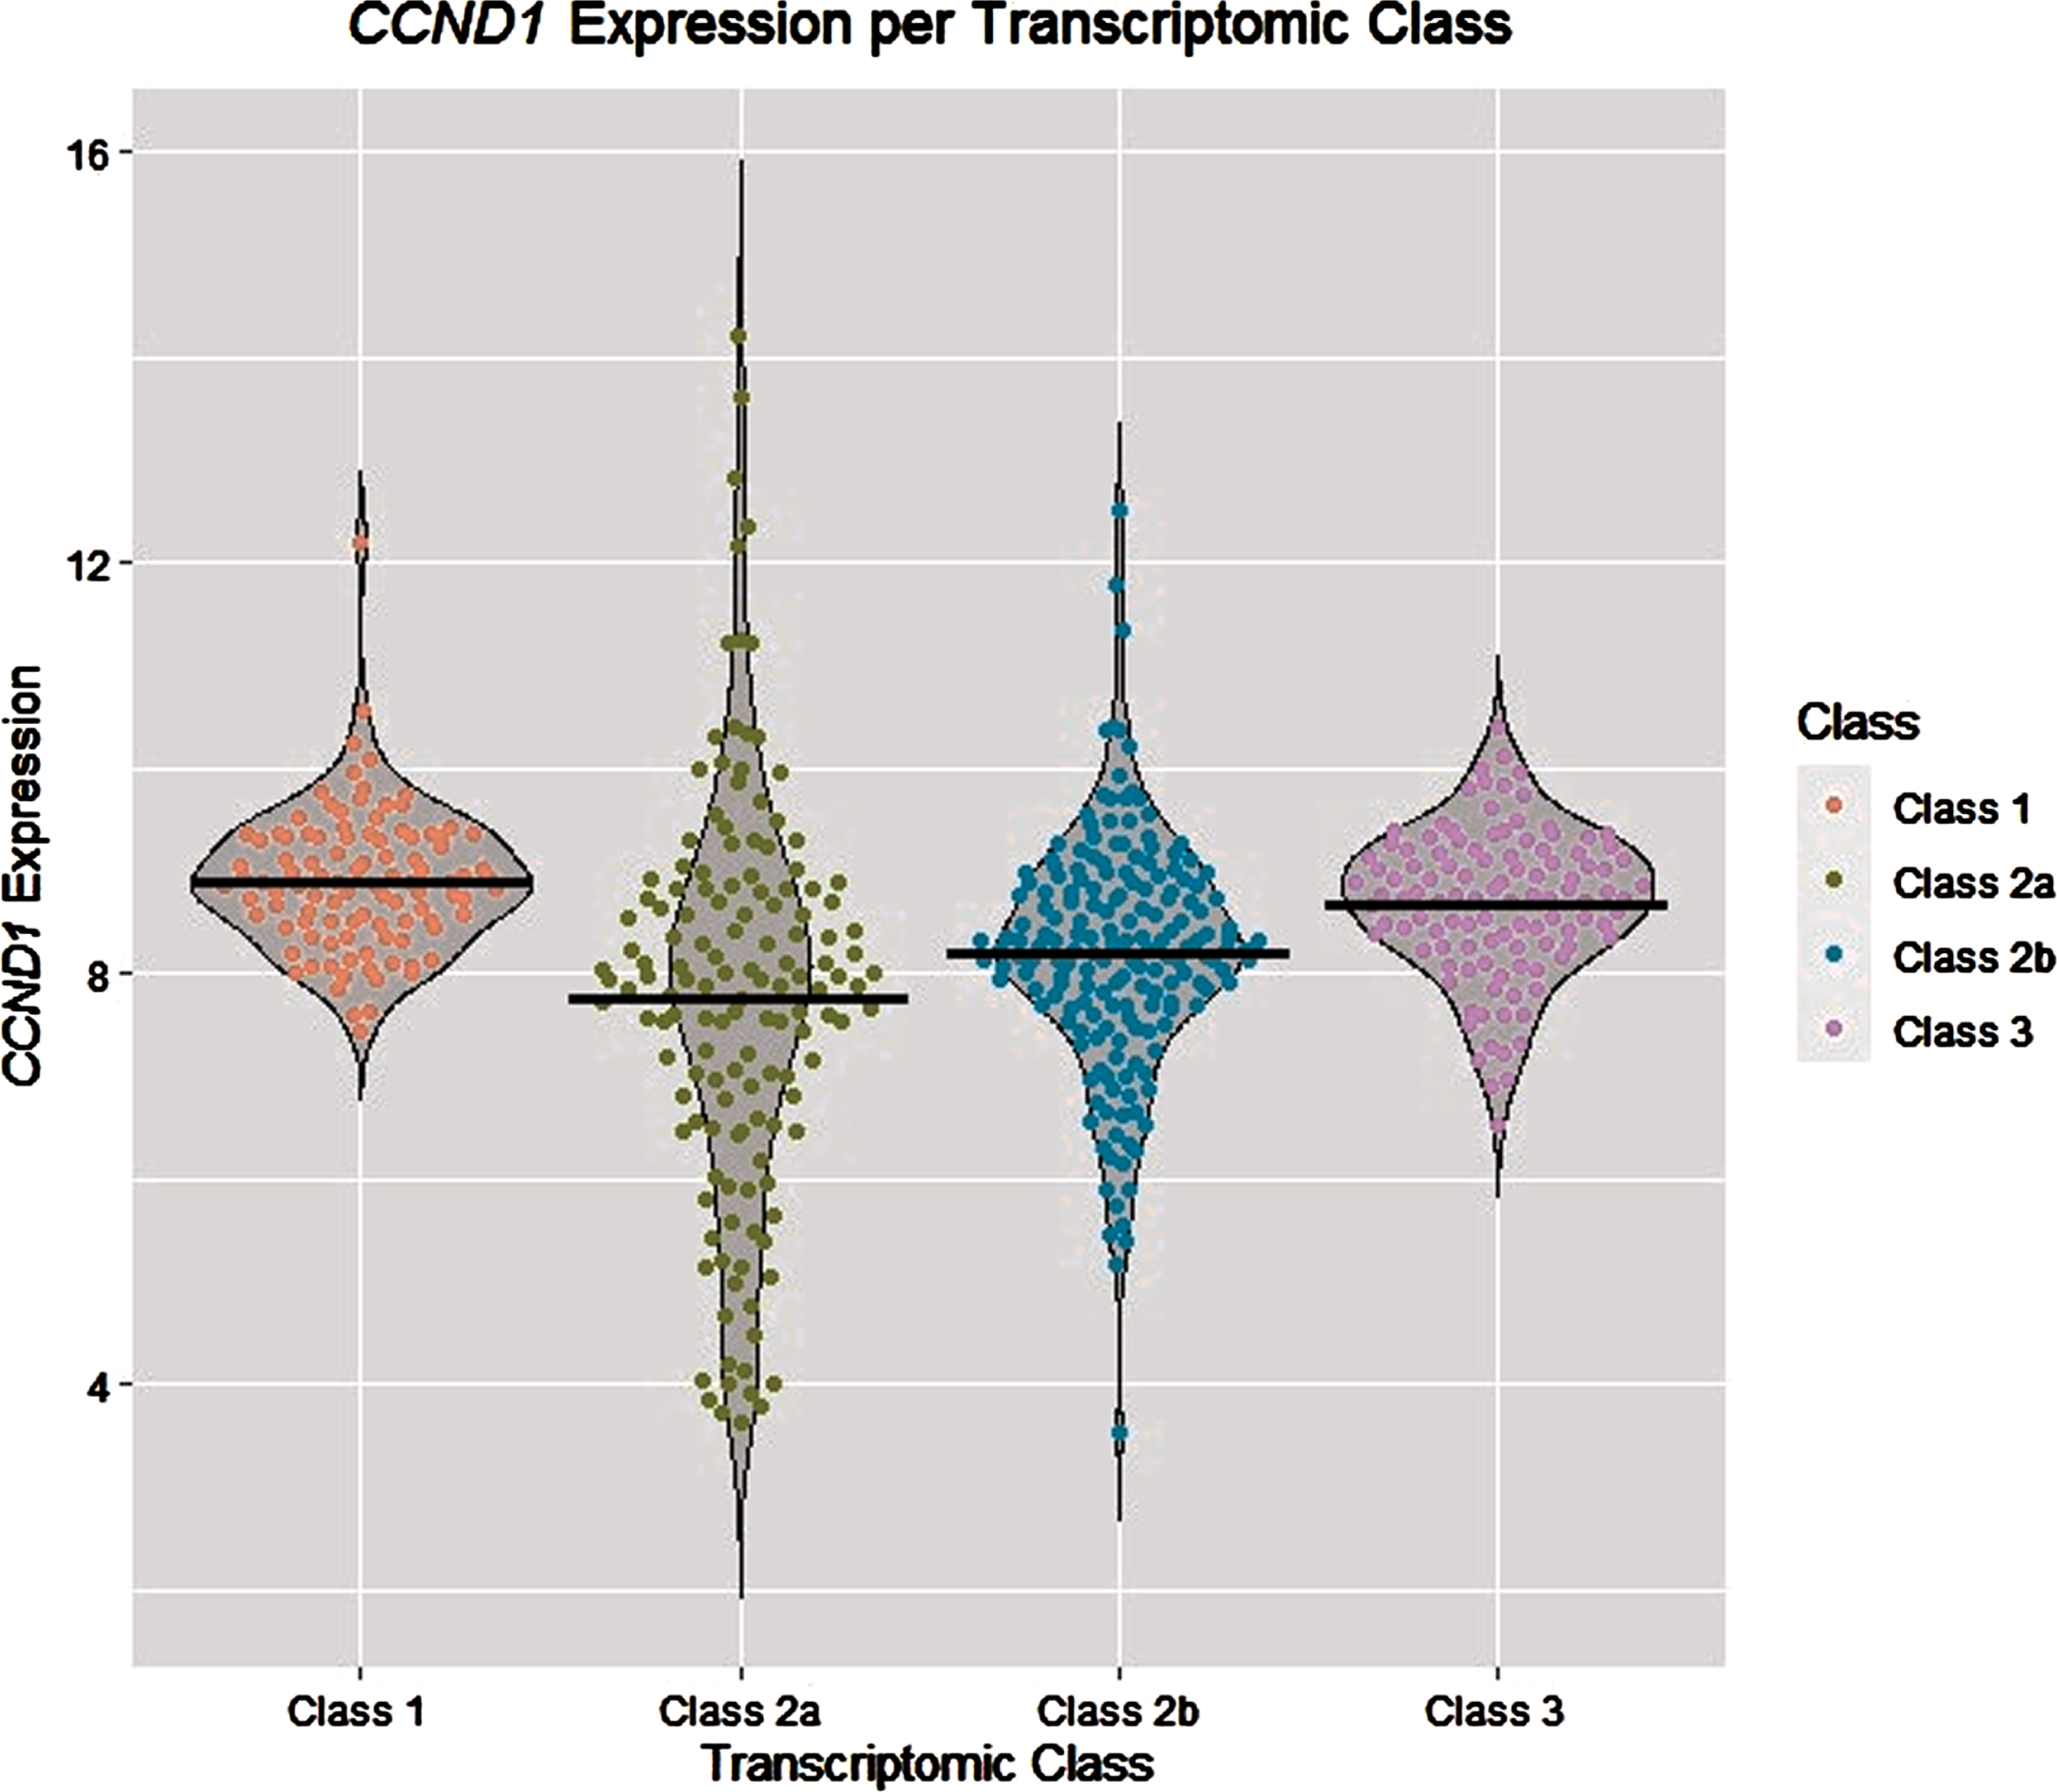 Expression levels of CCND1 in tumours from different transcriptomic classes in publicly available data from UROMOL [9]. The black horizontal lines mark the mean expression levels per class.